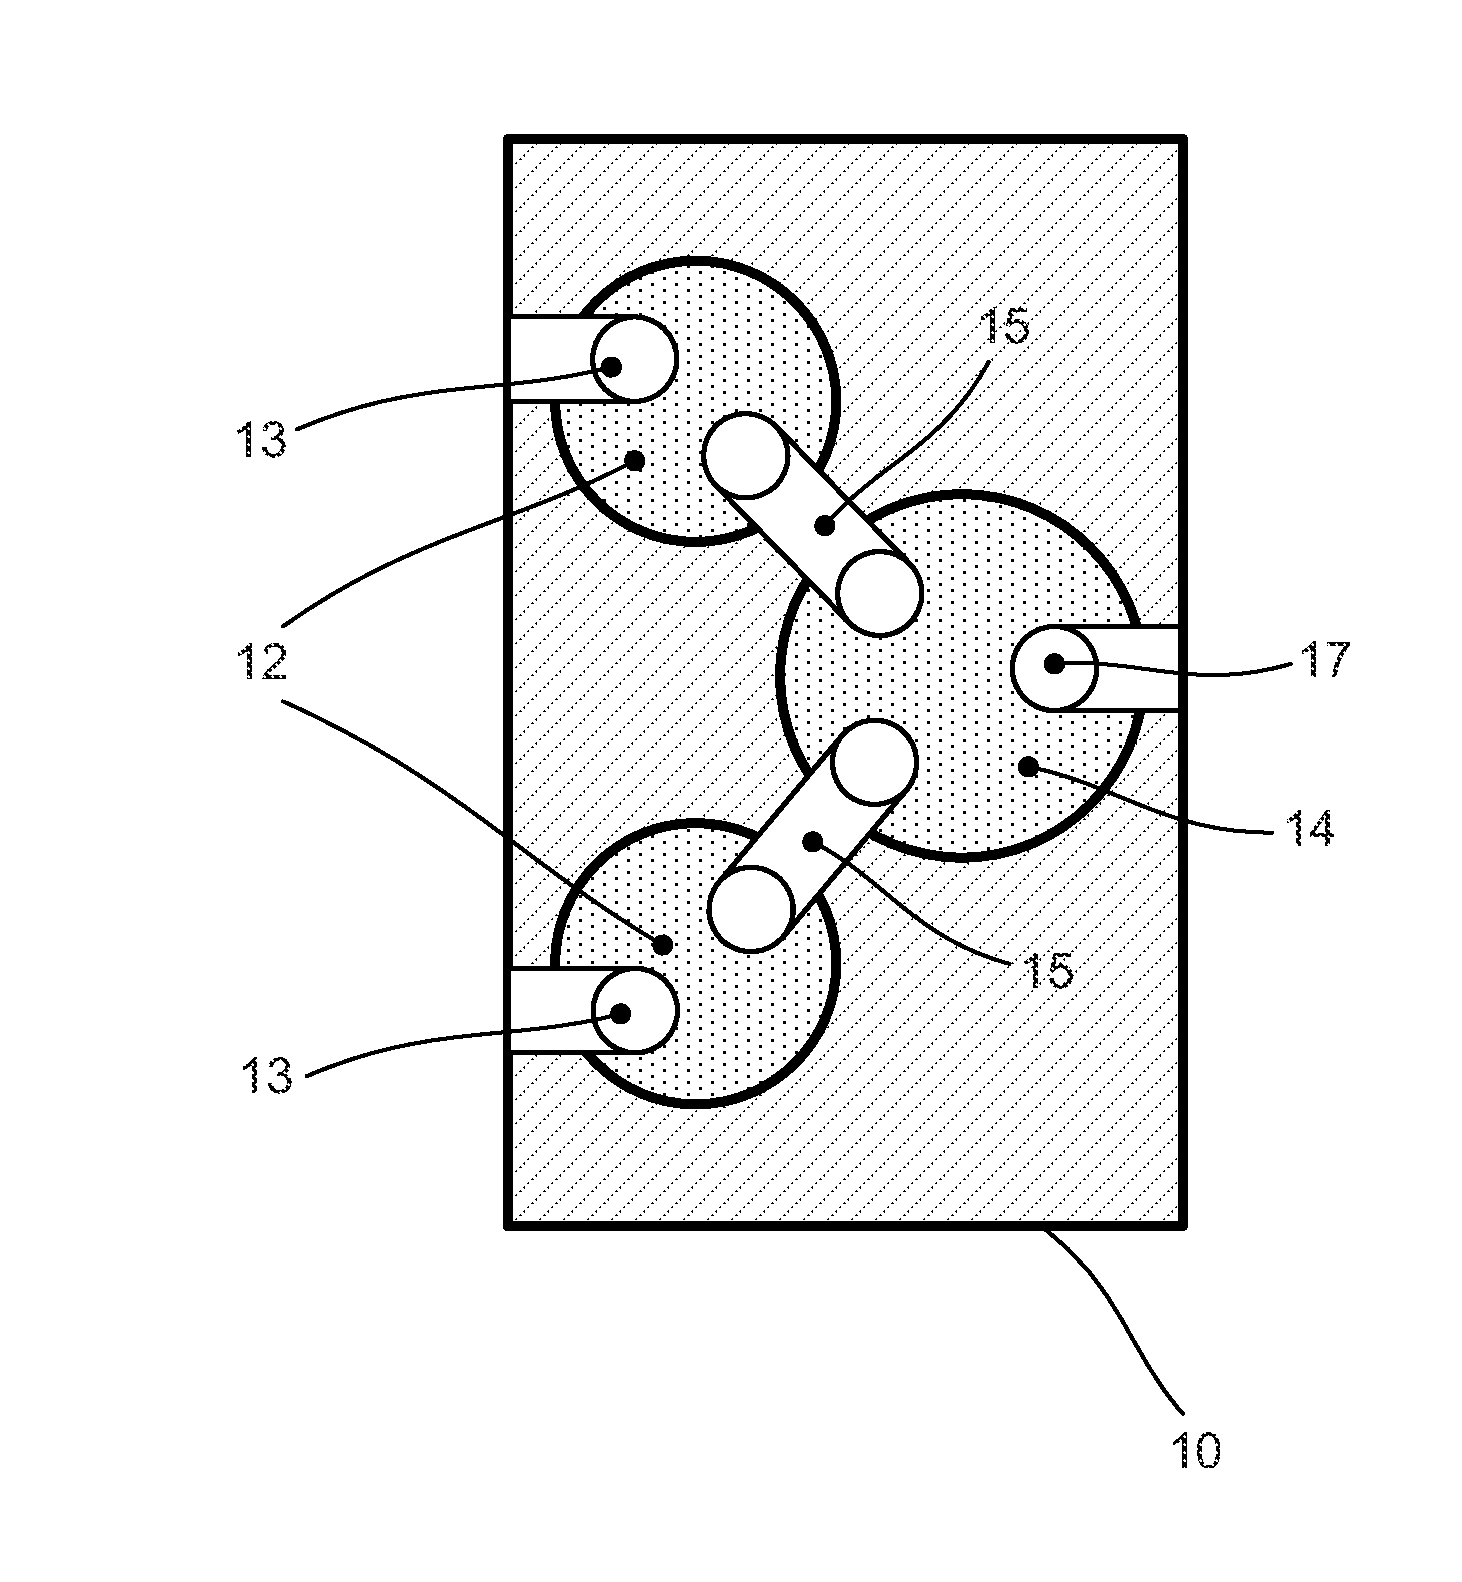 Exhaust compound internal combustion engine with controlled expansion